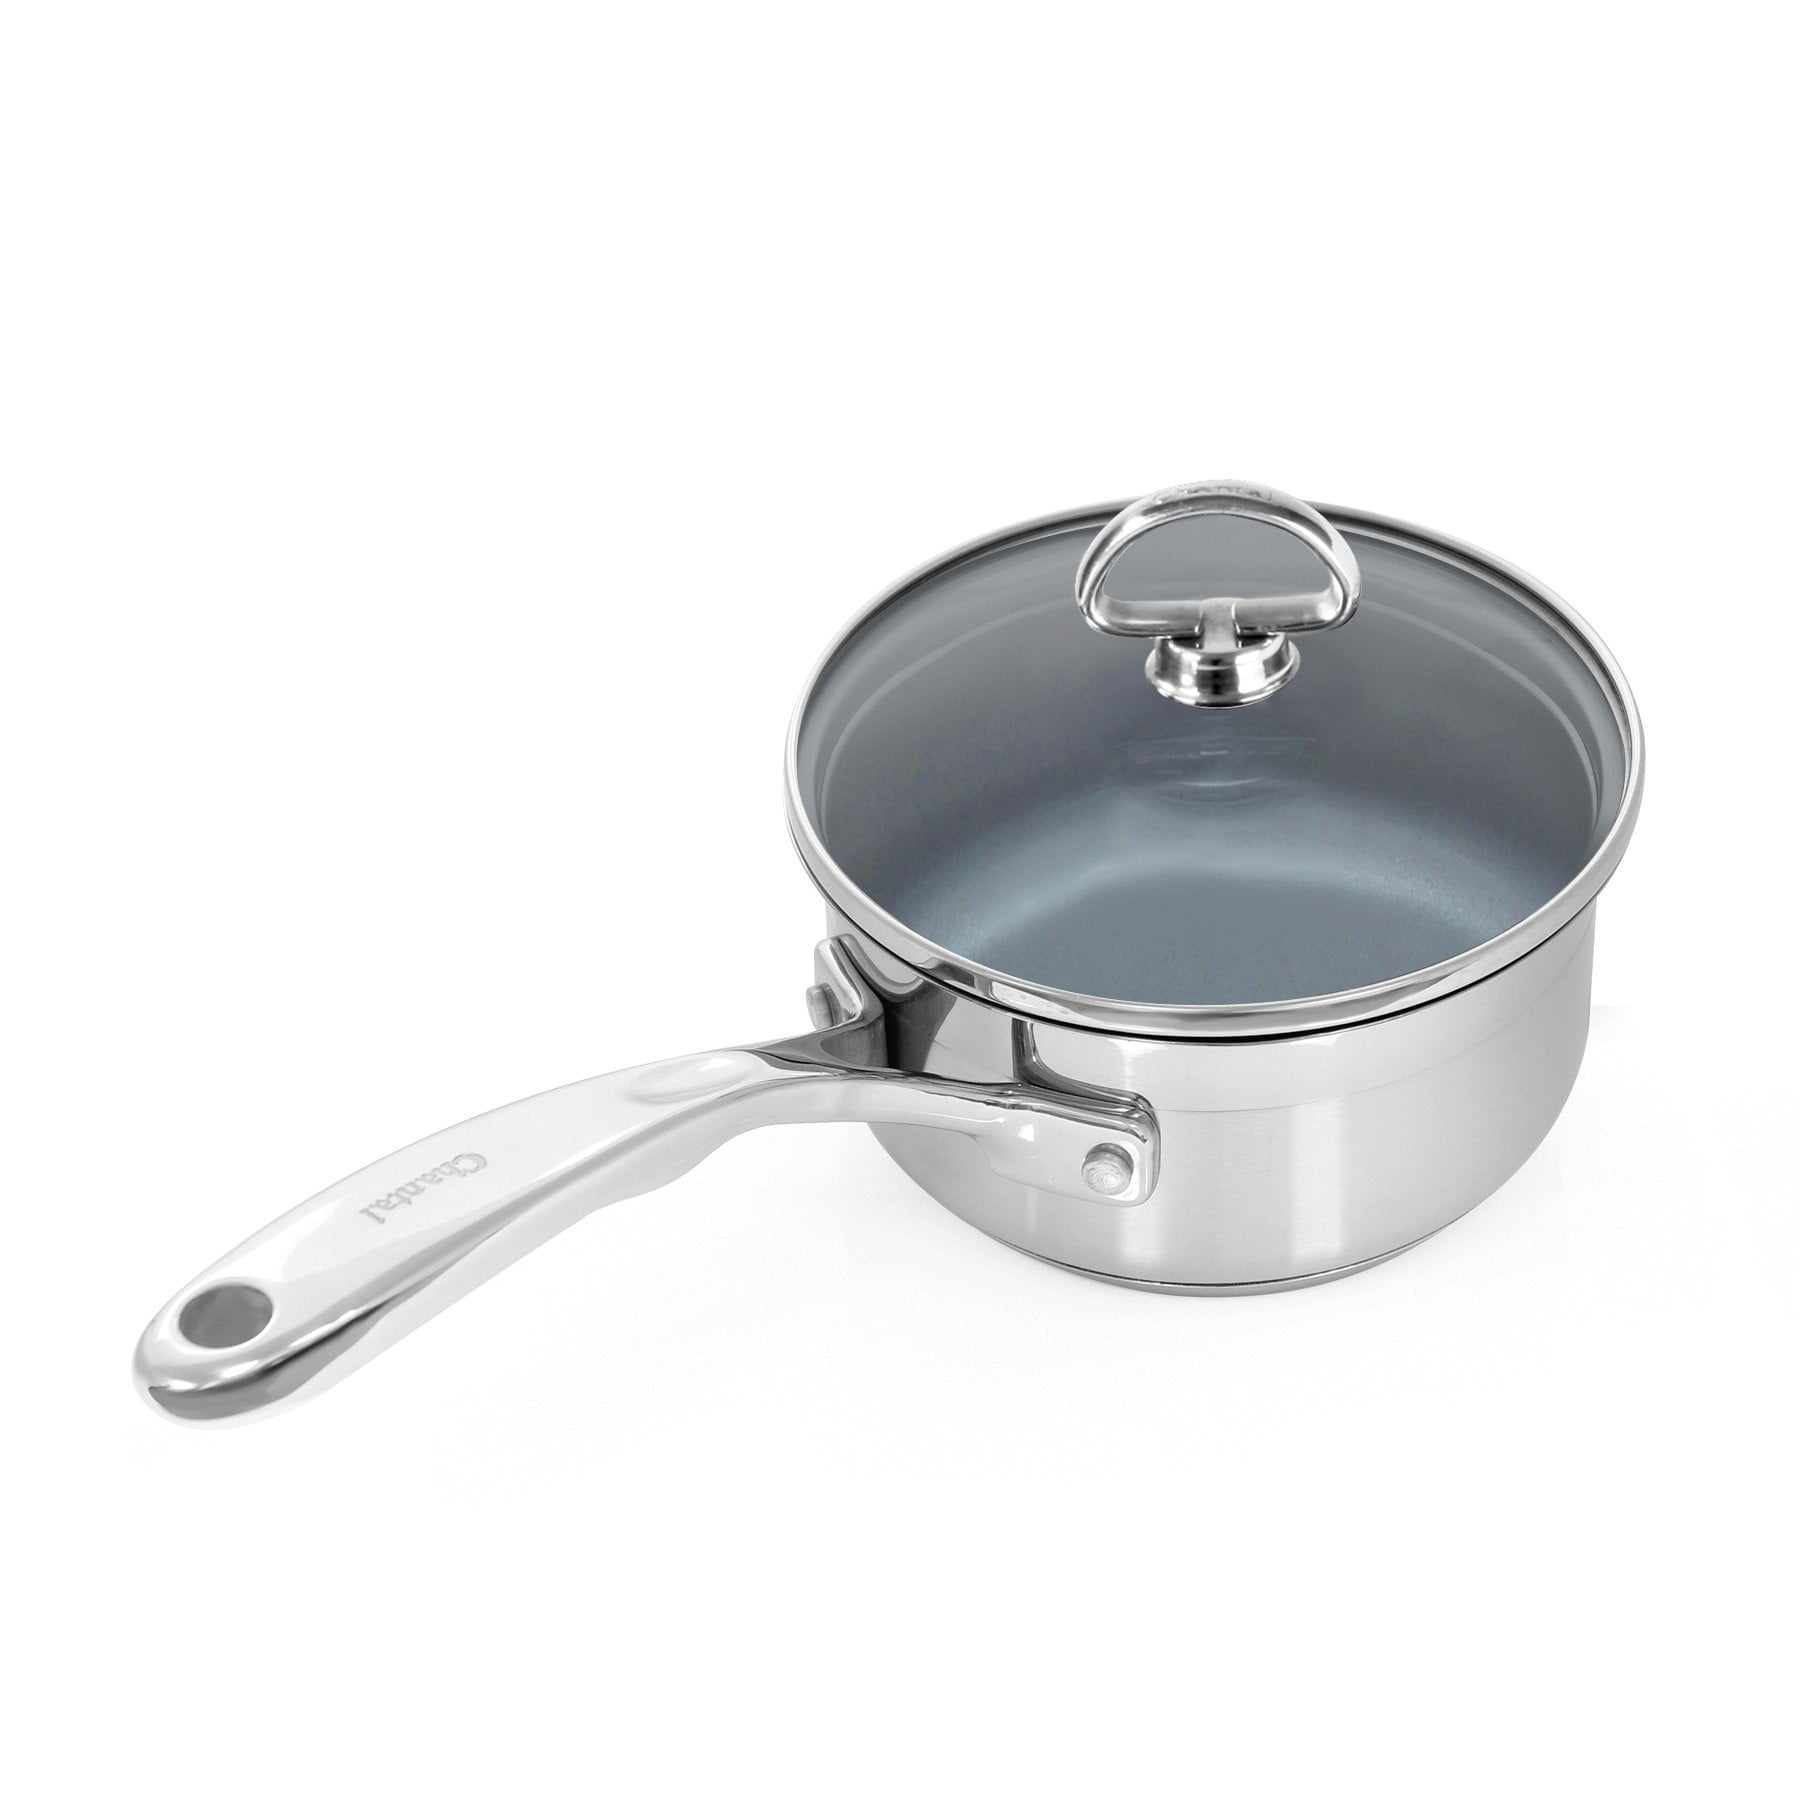 Induction 21 Steel Ceramic Coated Saute Skillet with Lid (5 Qt